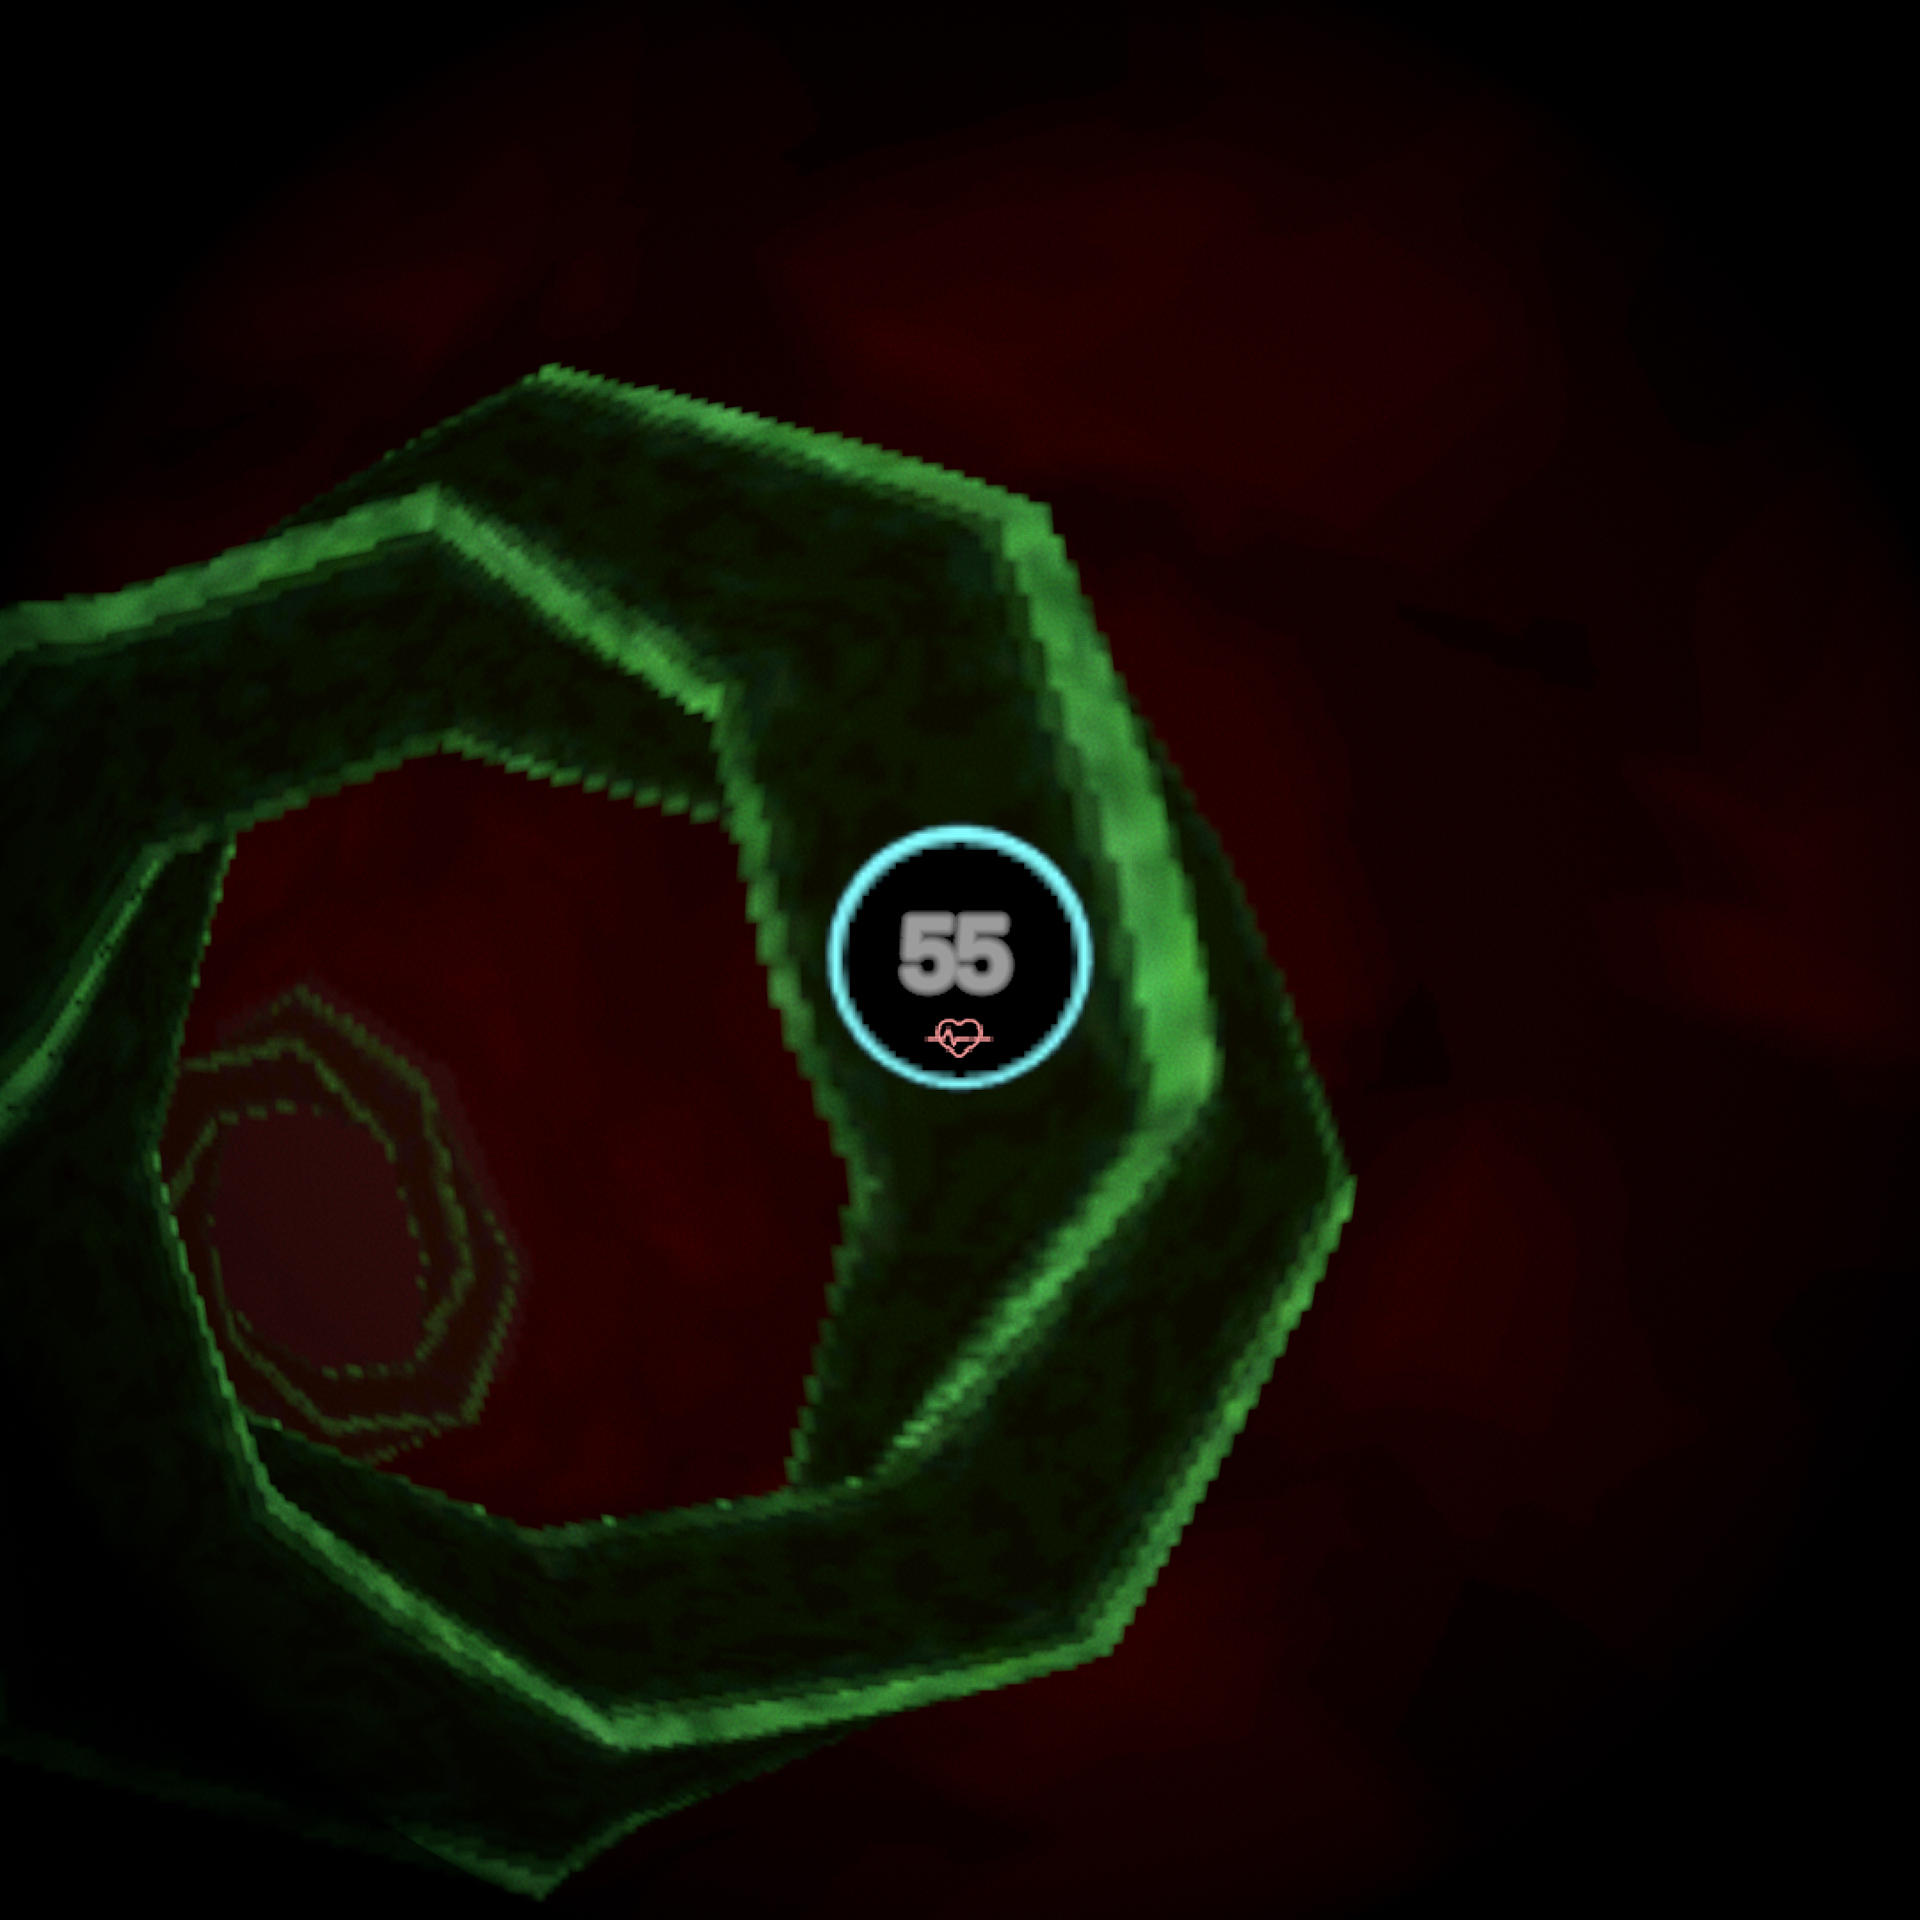 A first-person perspective from inside a dark, low resolution red tunnel. There is a user interface on the center encircled by a blue cirble, and contains the number 55 and a small red heart icon. The tunnel is rimmed by two glowing green spiral-shaped rings, one in front of the other.